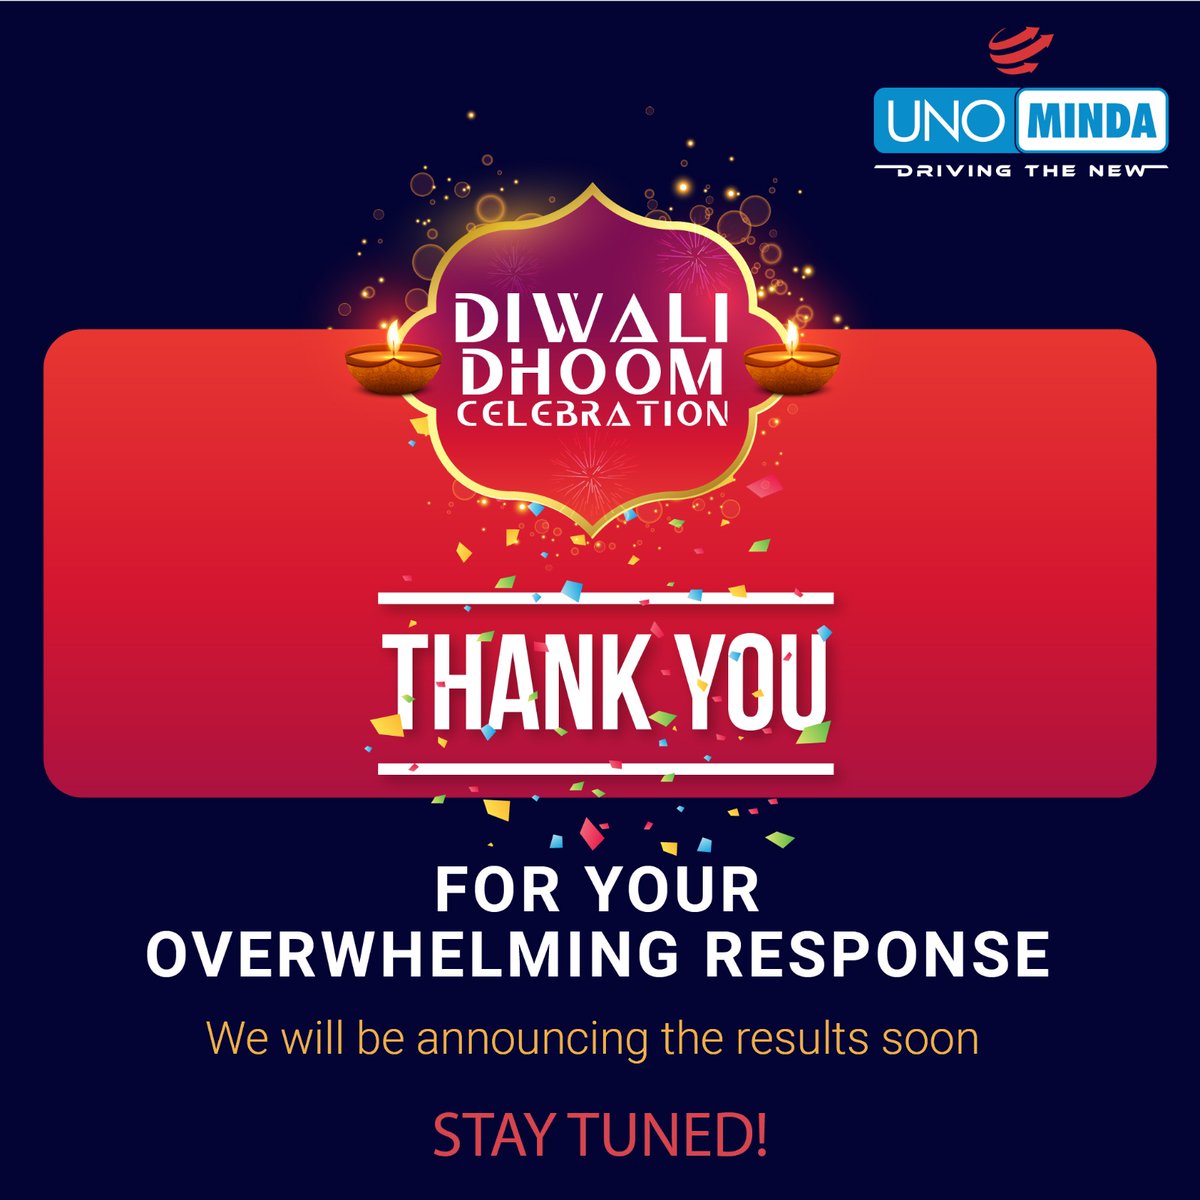 Thank you for your overwhelming response on the 'Diwali Dhoom Contest'. Stay tuned on this page for the results as they will be announced soon. !!!

#ContestAnnouncement #Contest #Contests #Contestalert #PhotoContest #ContestDay #DiwaliDhoom #DiwaliDhoom2023